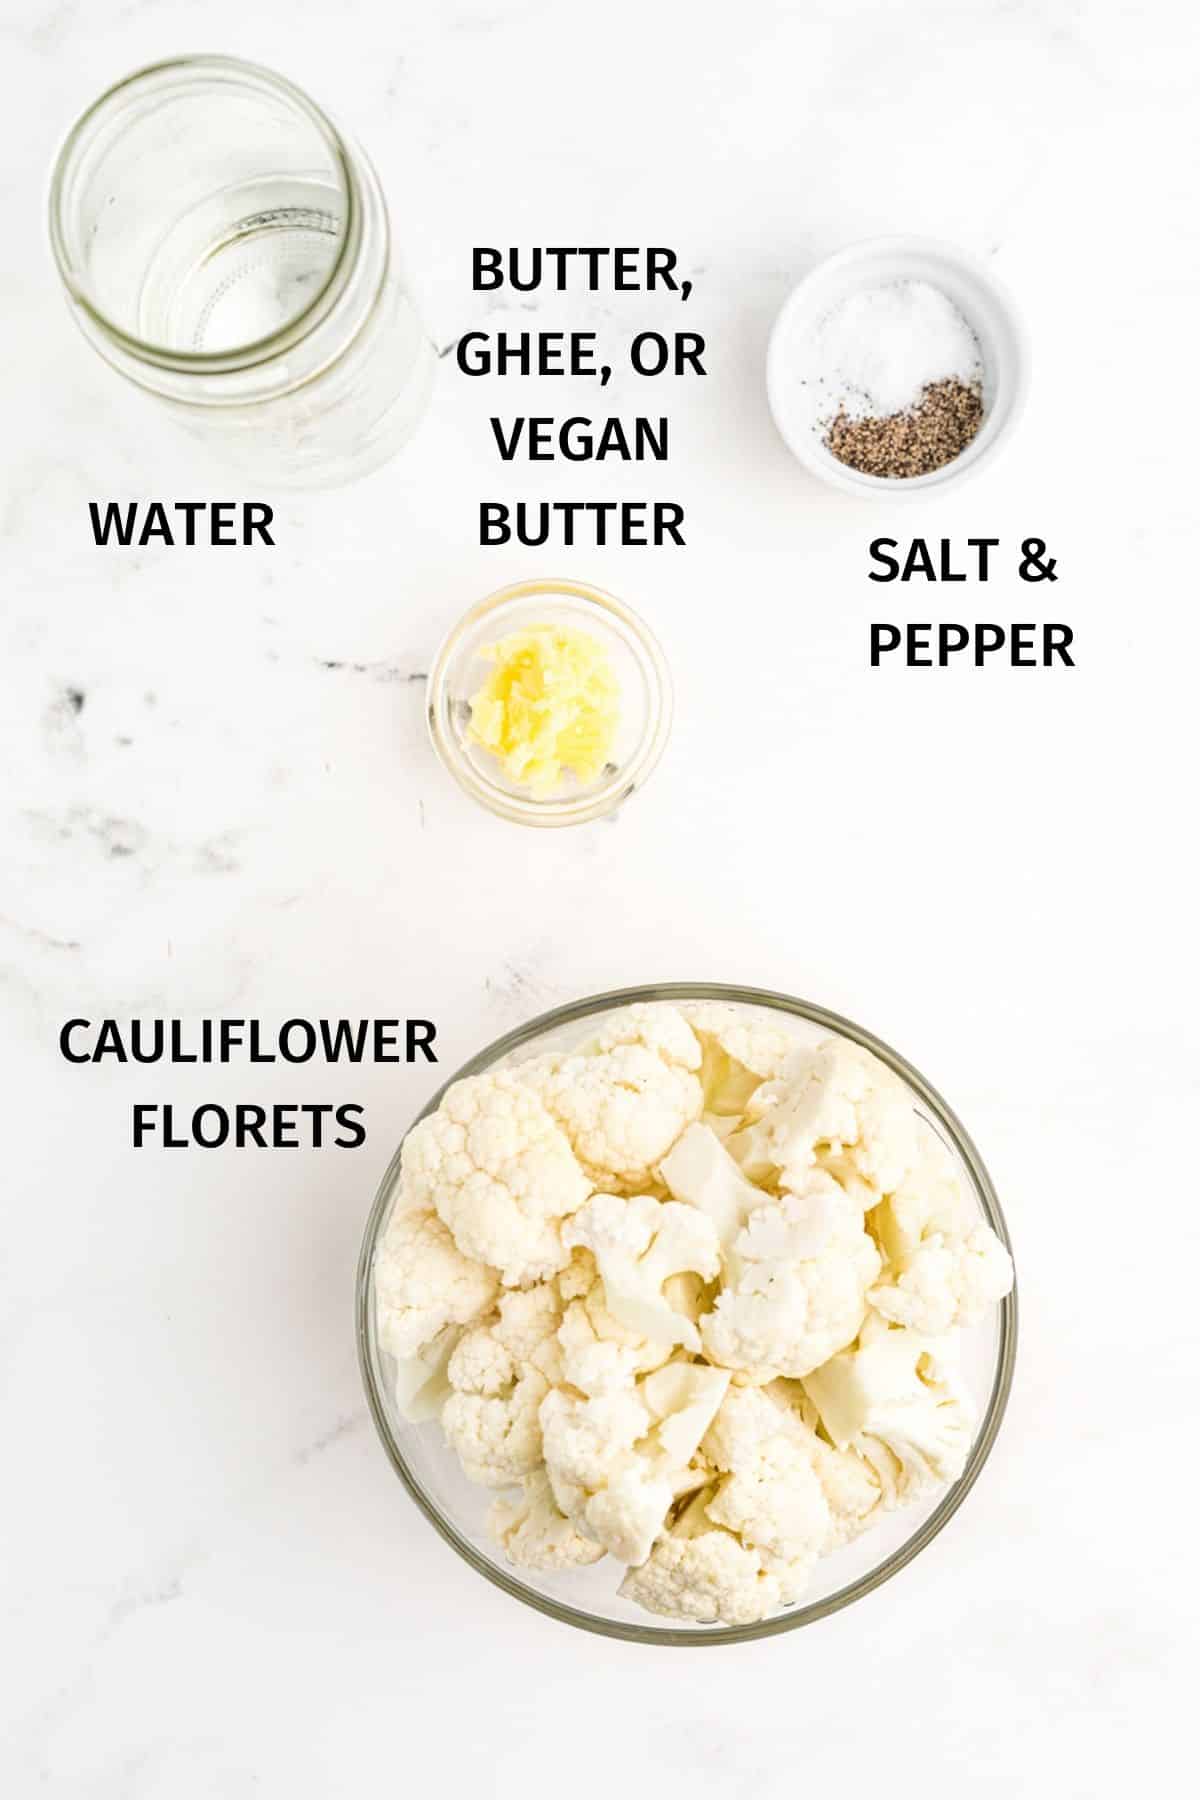 photo with labeled ingredients for making instant pot cauliflower mash.